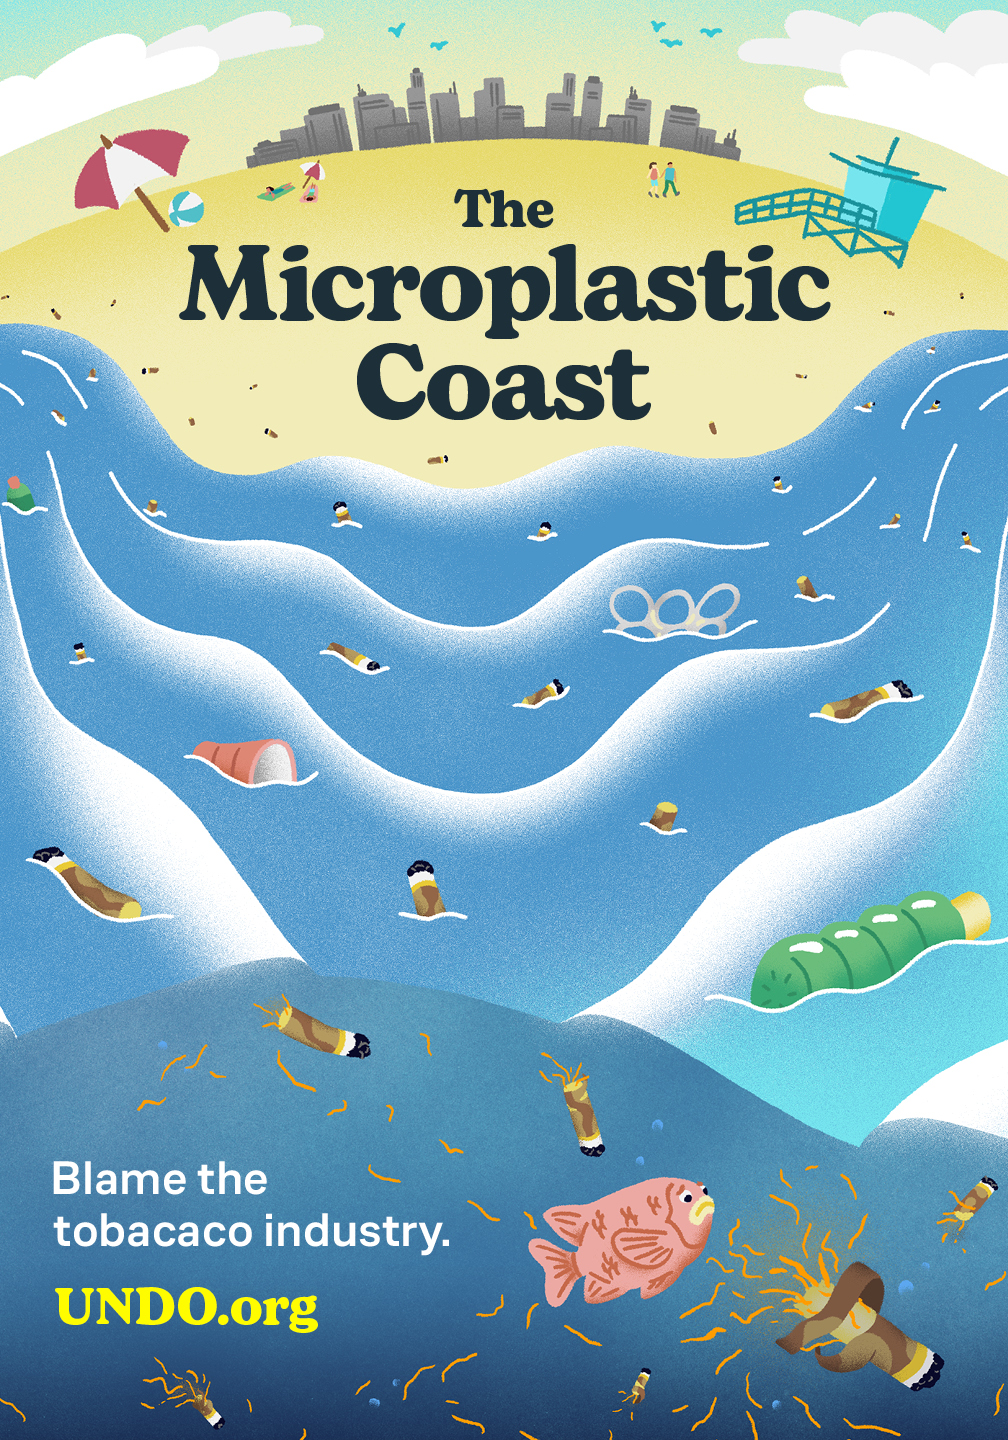 Animation graphic of a city skyline on the sandy beach and a light blue, wavy ocean filled with trash and cigarette butts with black text reading: The Microplastic Coast. (in white) Blame the tobacco industry. UNDO.org